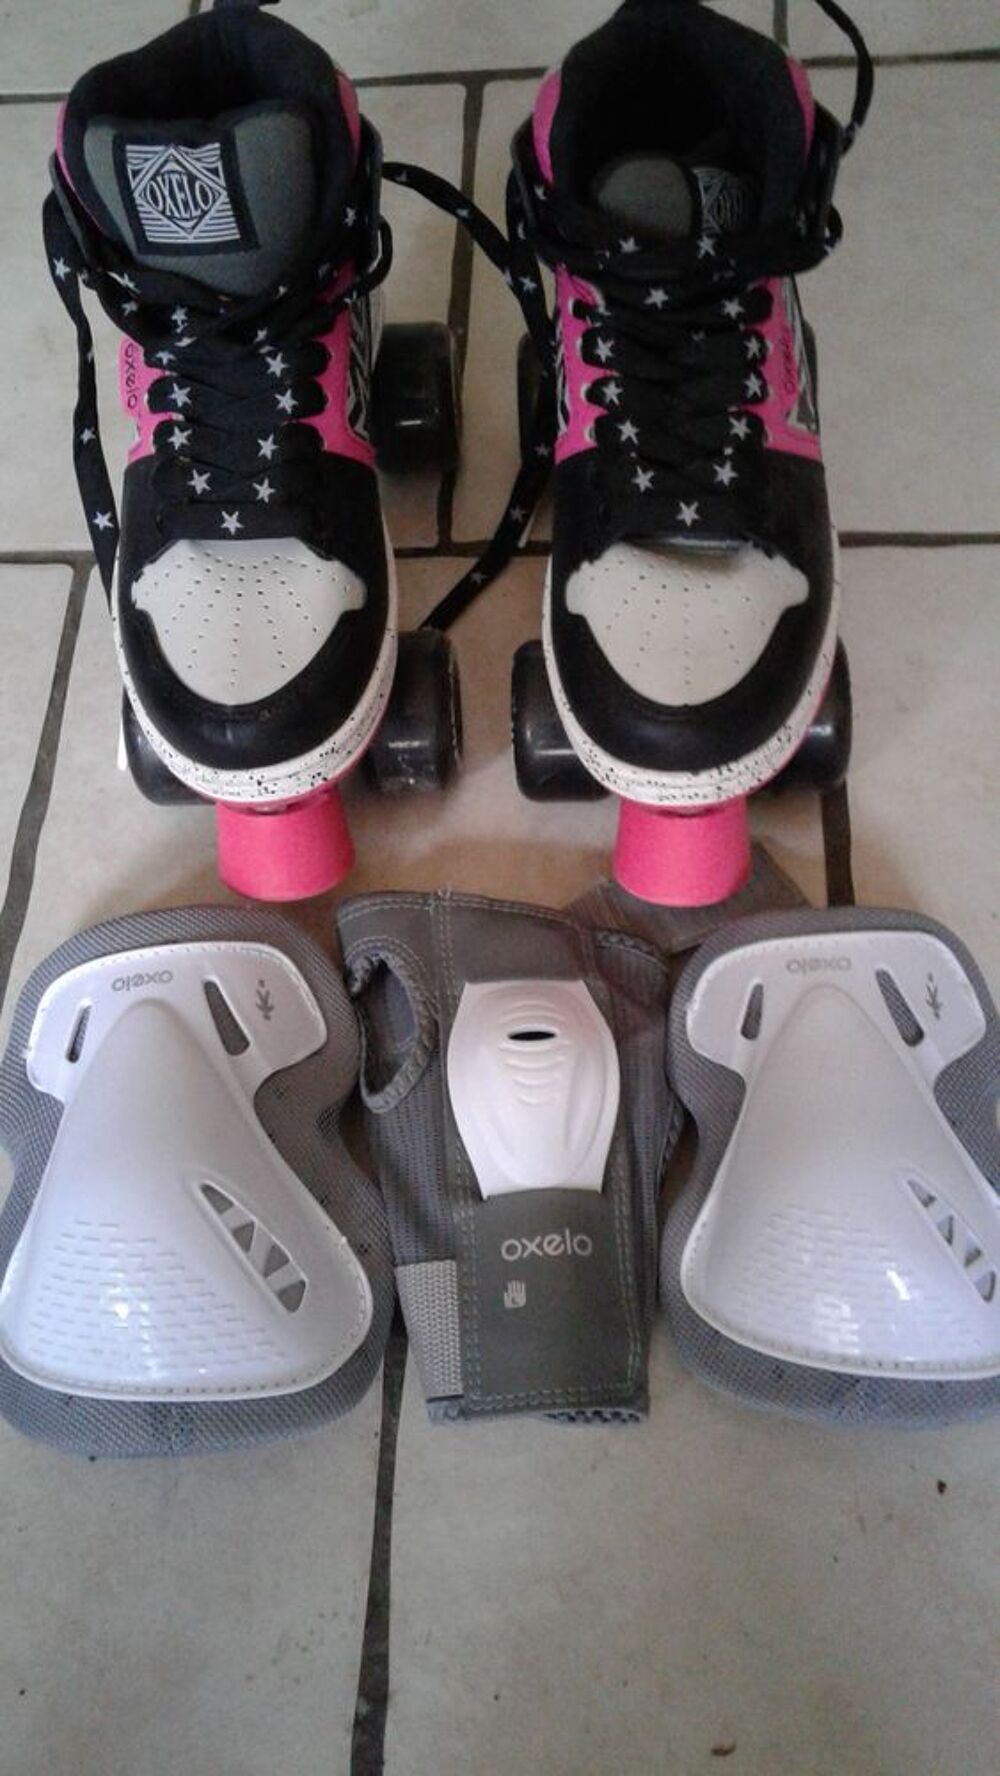 rollers patins Oxelo Jeux / jouets